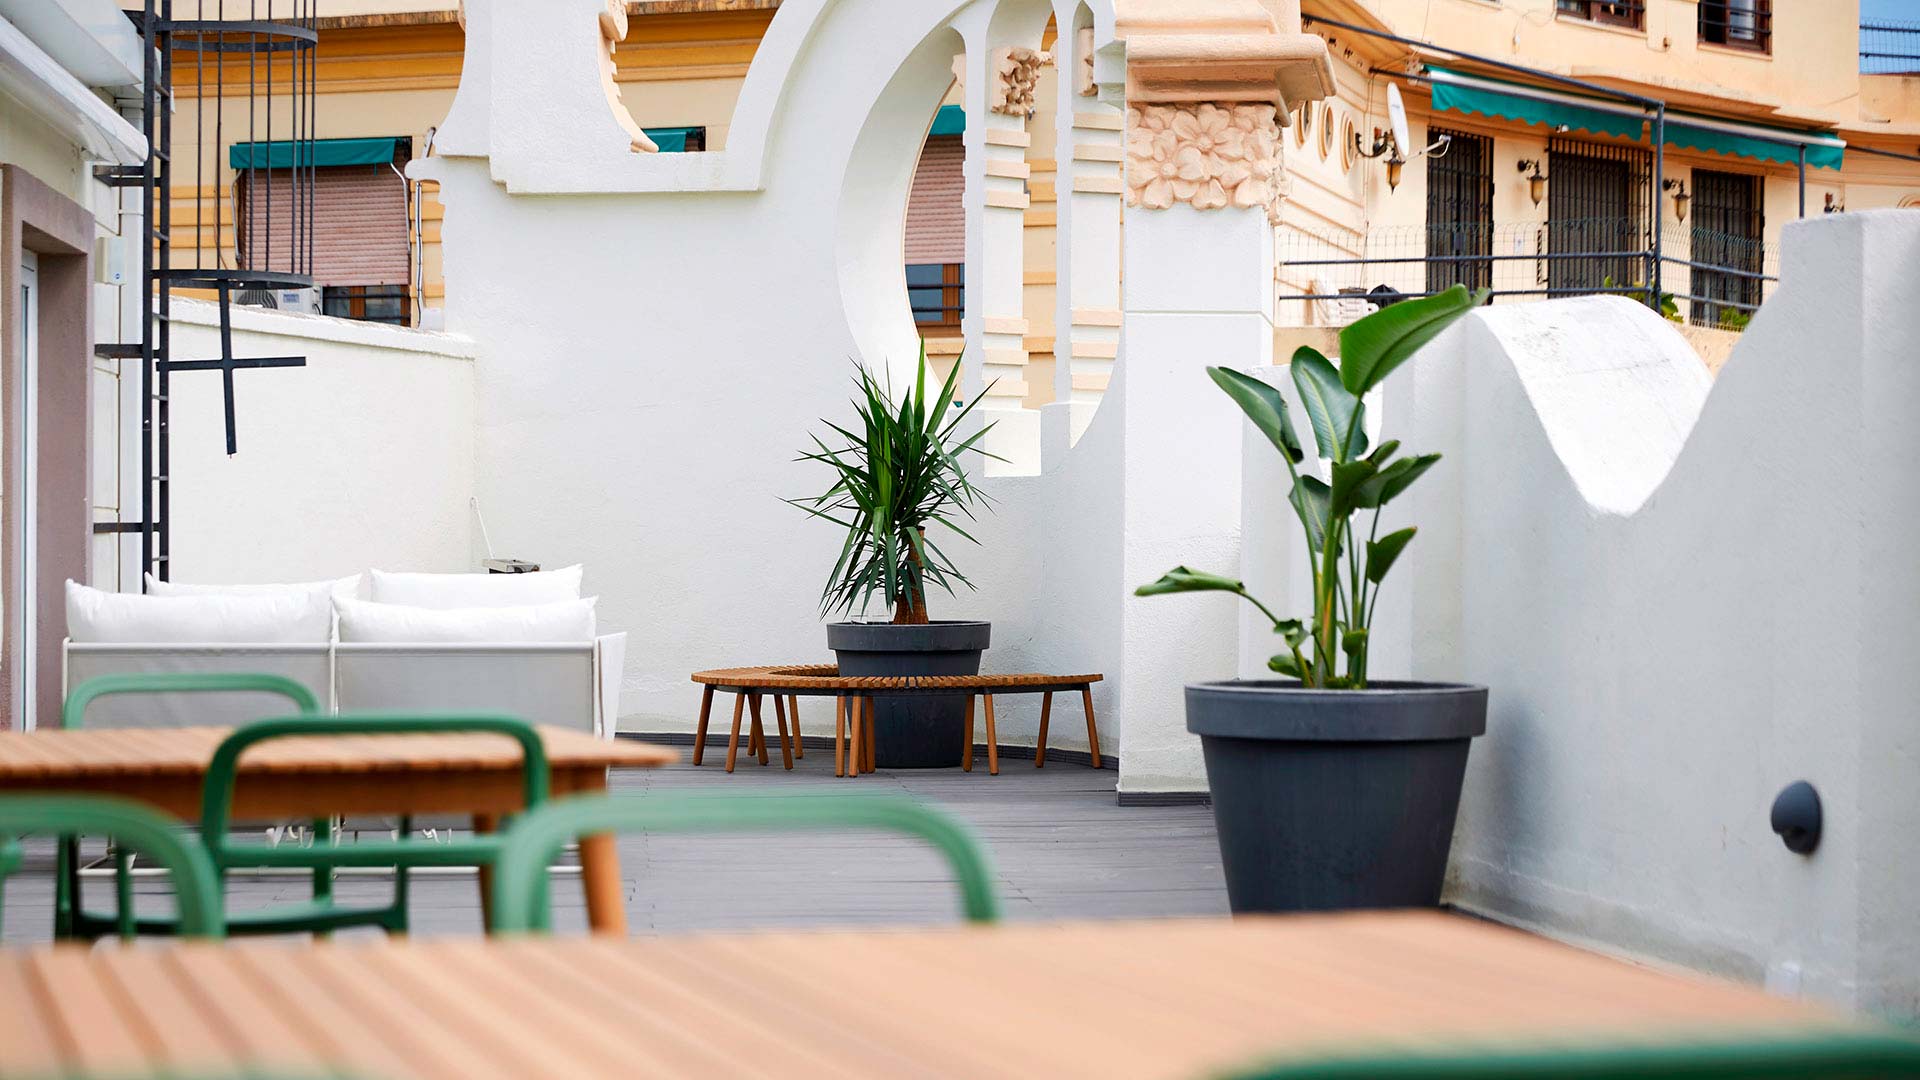 The outdoor areas of the offices, which had been leisure areas, are equipped with wifi network, power sockets and mobile videoconferencing equipment and become an open and flexible workspace. This is the case of the Abessis offices in Valencia.